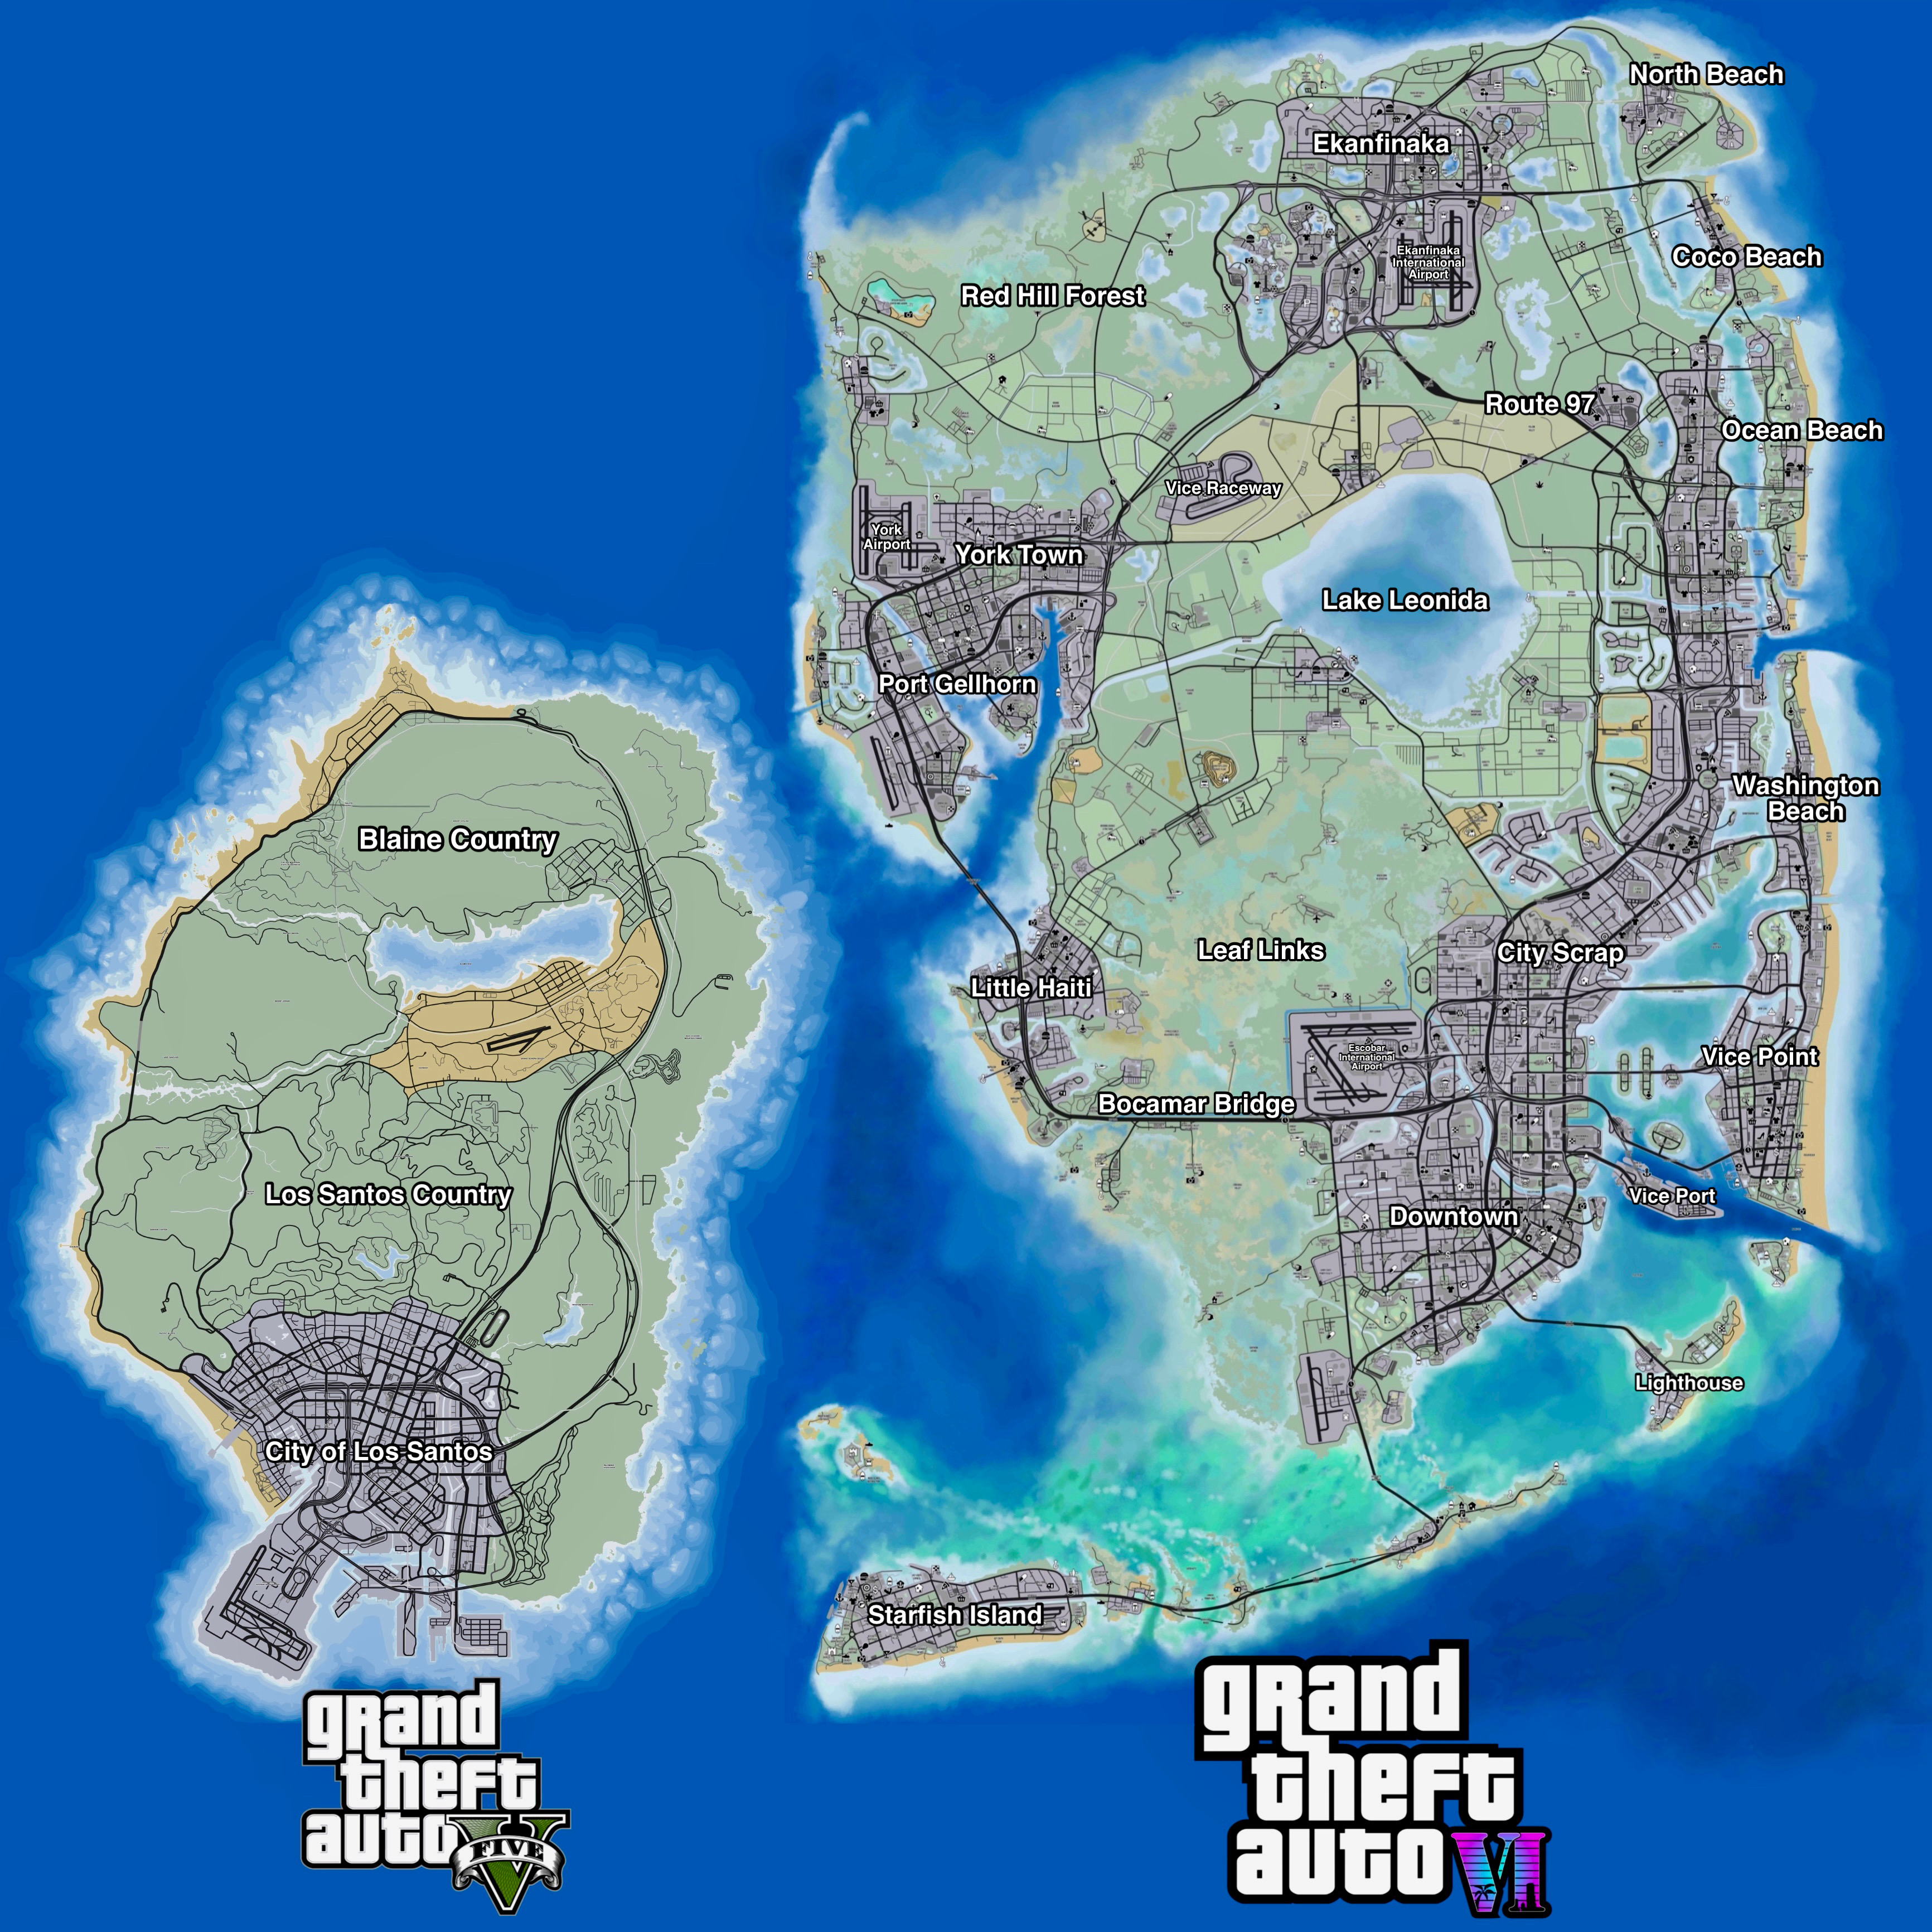 GTA 6 Trailer Countdown ⏳ on Twitter: "GTA 6 map concept based on Vice City  which is rumored to be 2x the size of GTA 5's map. https://t.co/SMHw50JsLm"  / Twitter